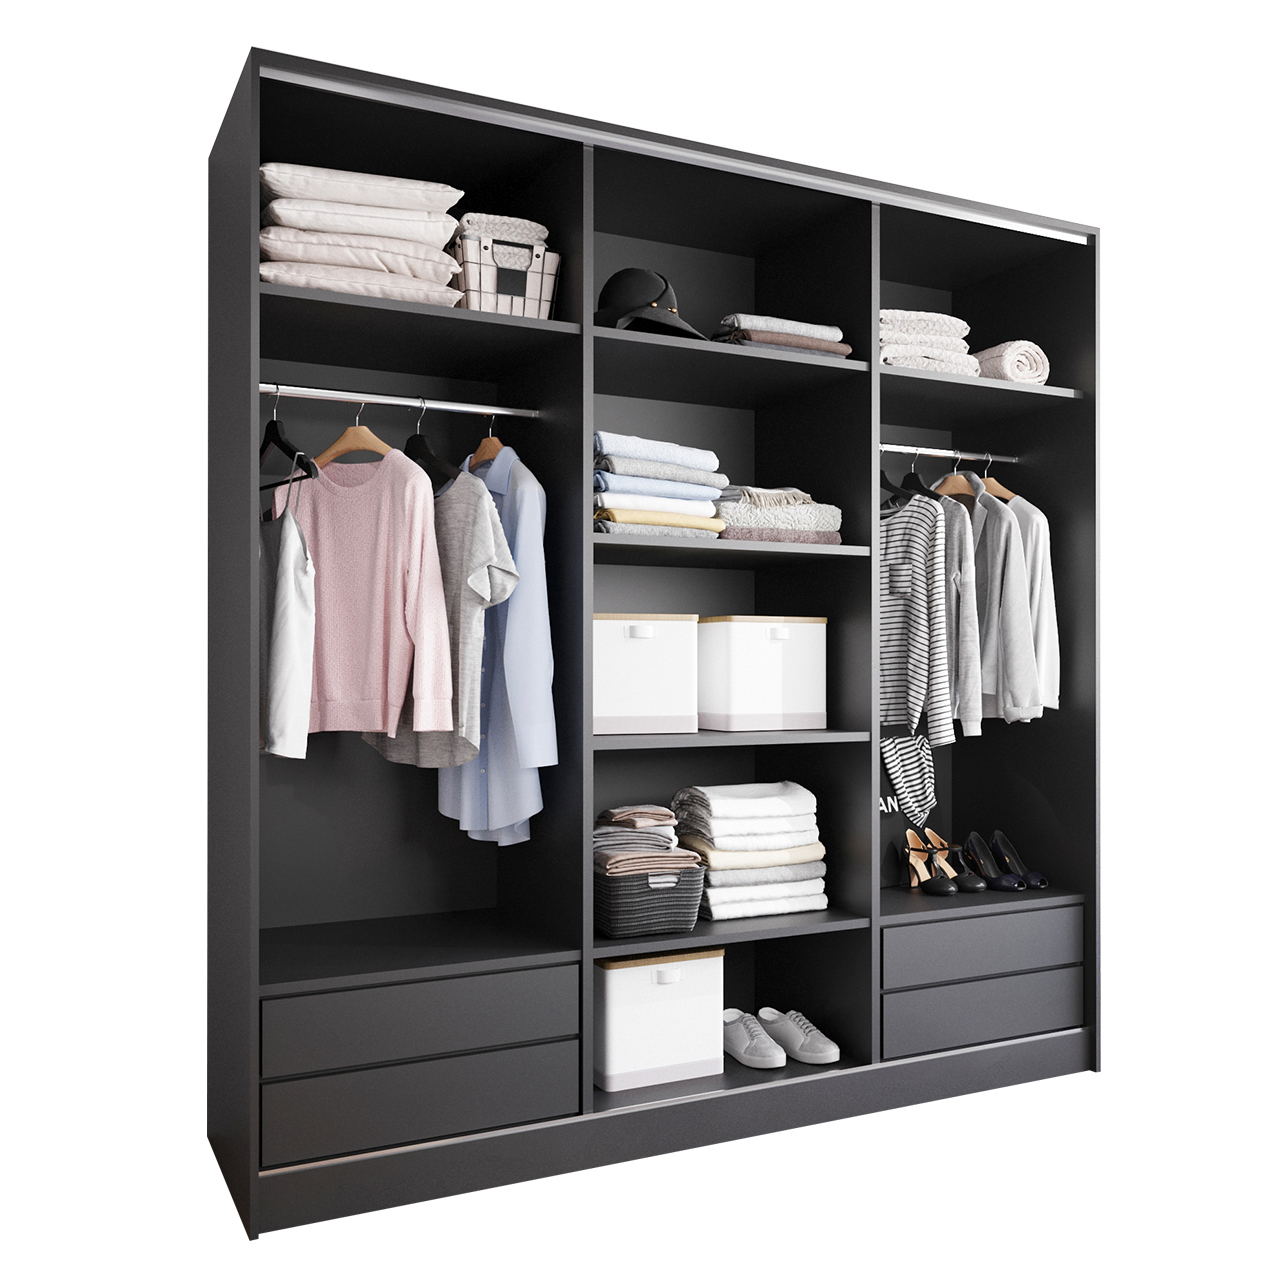 Sliding Wardrobe with Mirror and Drawers GRANO D 180 black